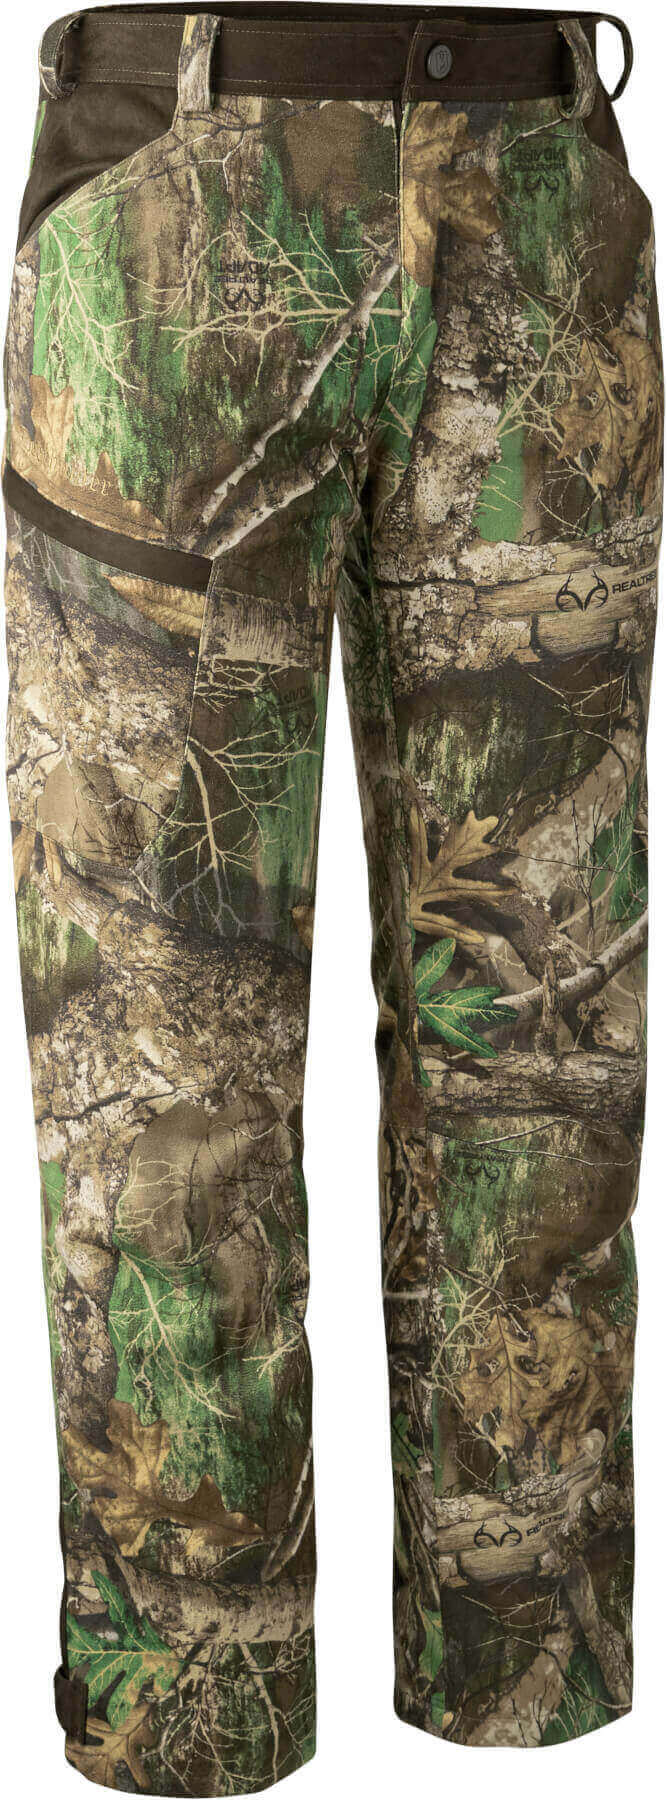 Camouflagehose Explore Realtree Adapt Muster mit Taschen